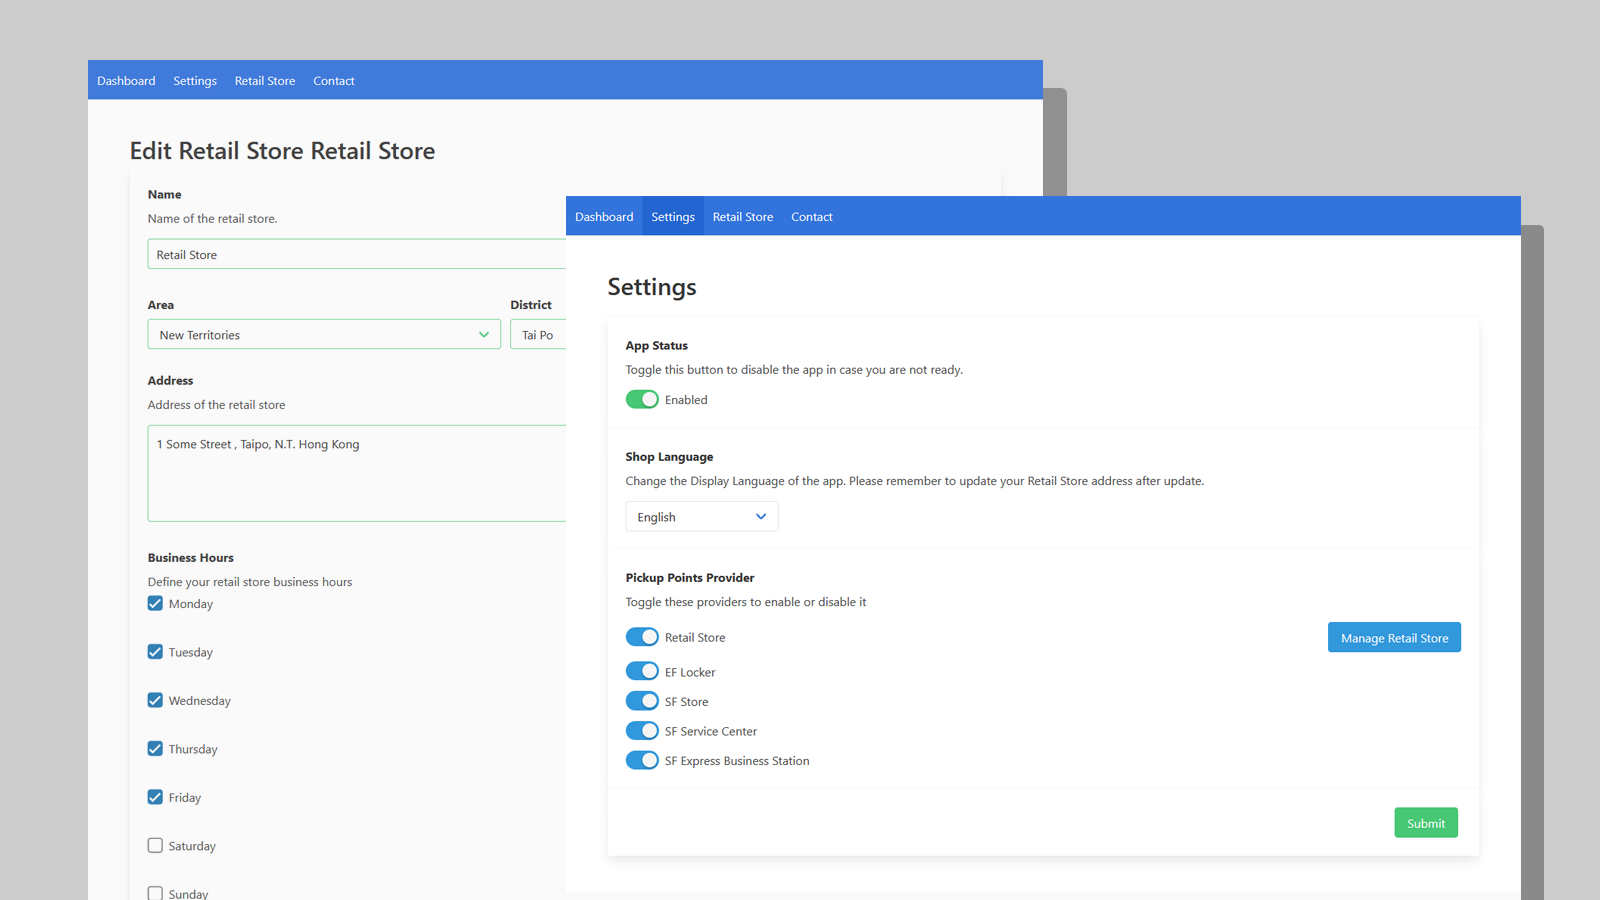 Customize settings and mange store listing from admin panel